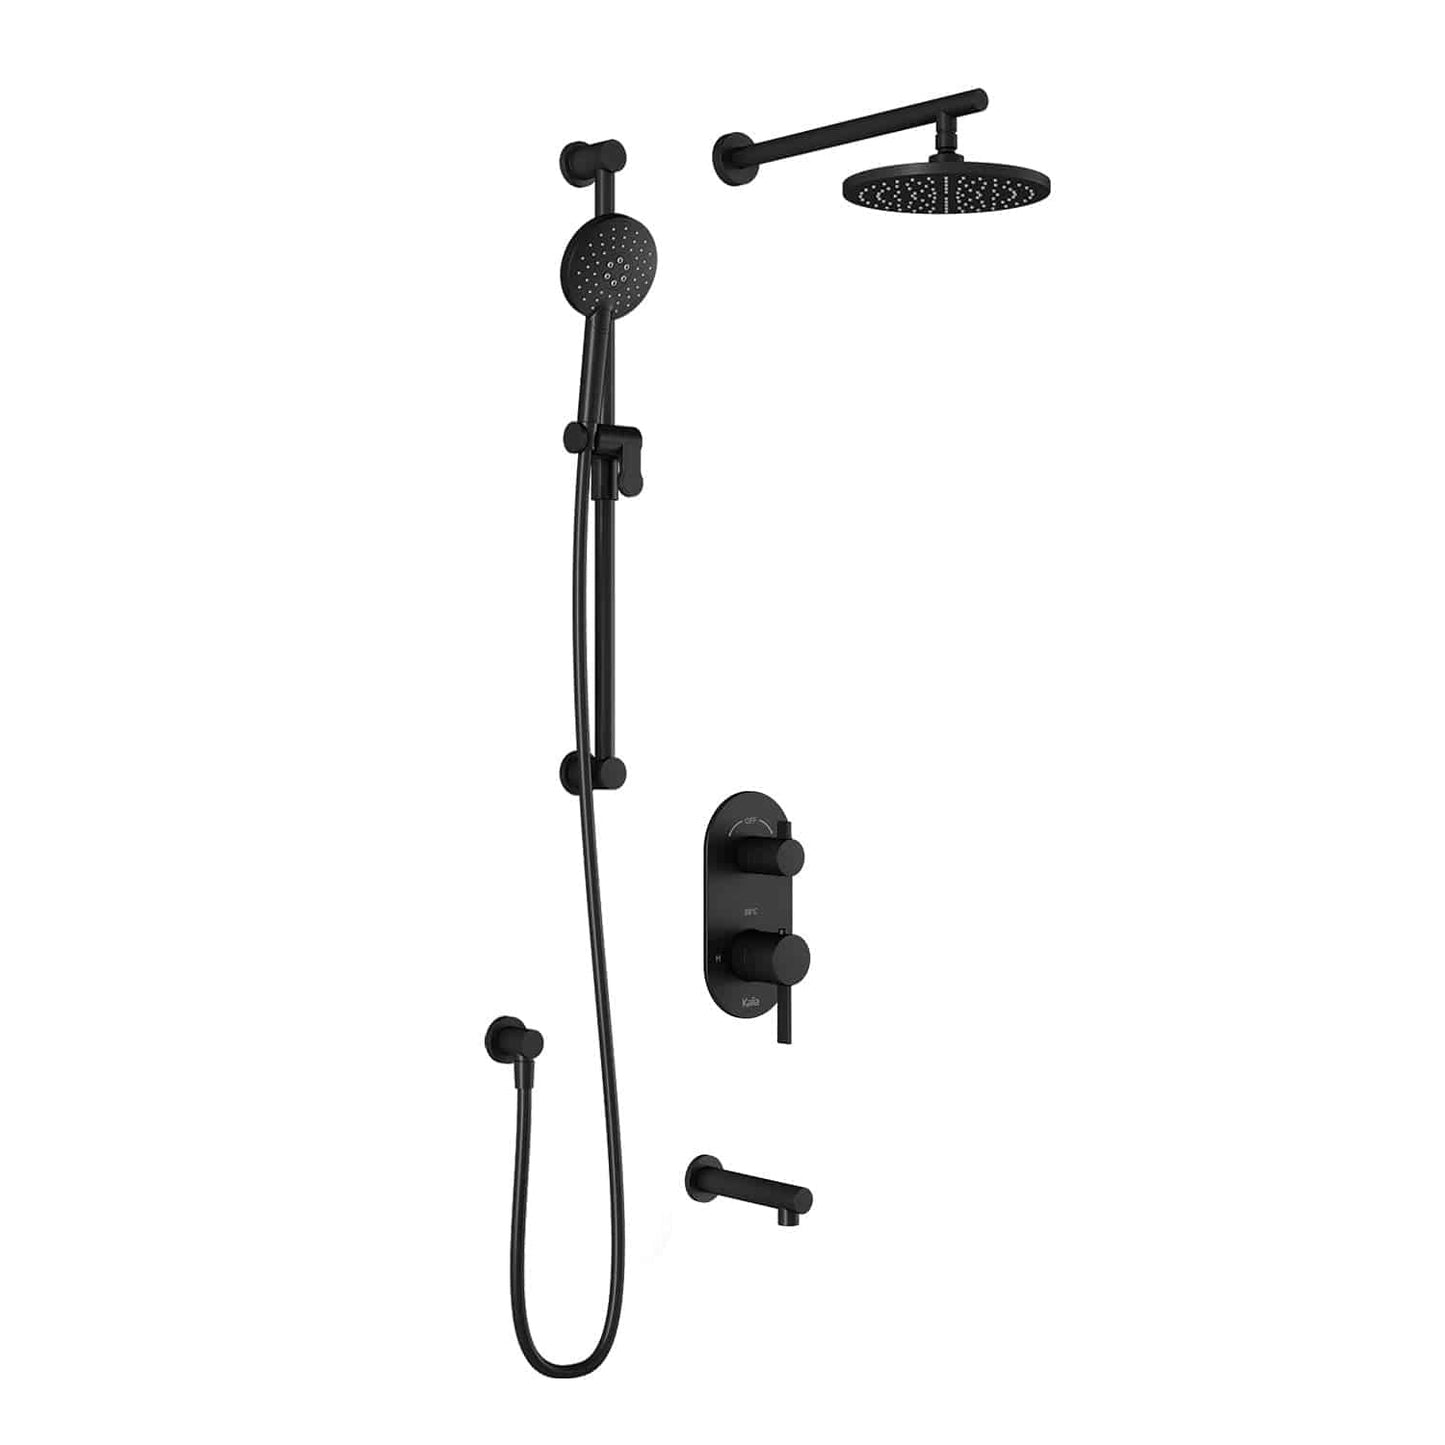 Kalia RoundOne TD3 (Valve Not Included) AQUATONIK T/P with Diverter Shower System with Wall Arm- Matte Black